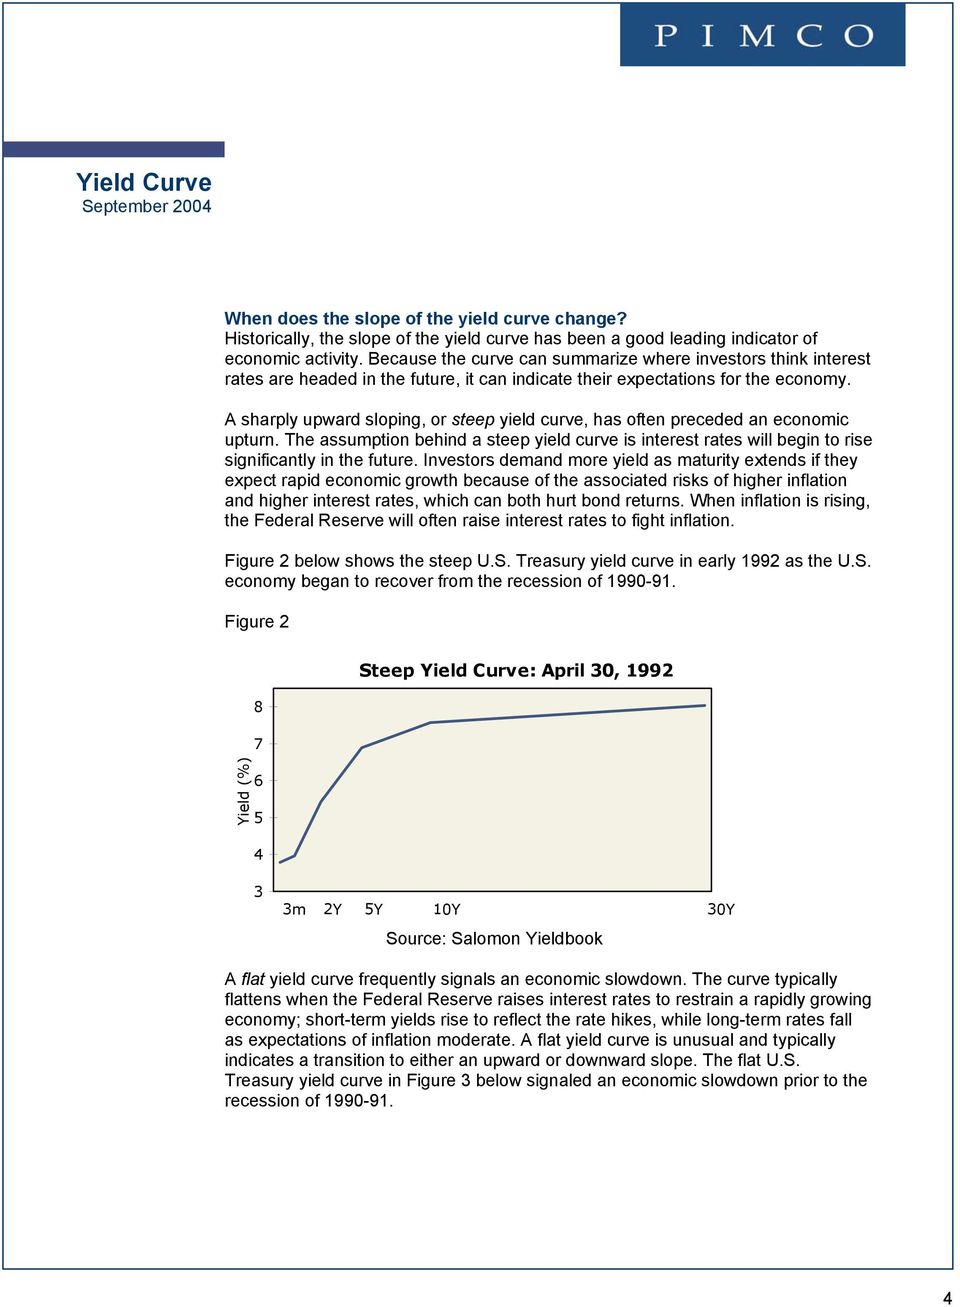 A sharply upward sloping, or steep yield curve, has often preceded an economic upturn. The assumption behind a steep yield curve is interest rates will begin to rise significantly in the future.